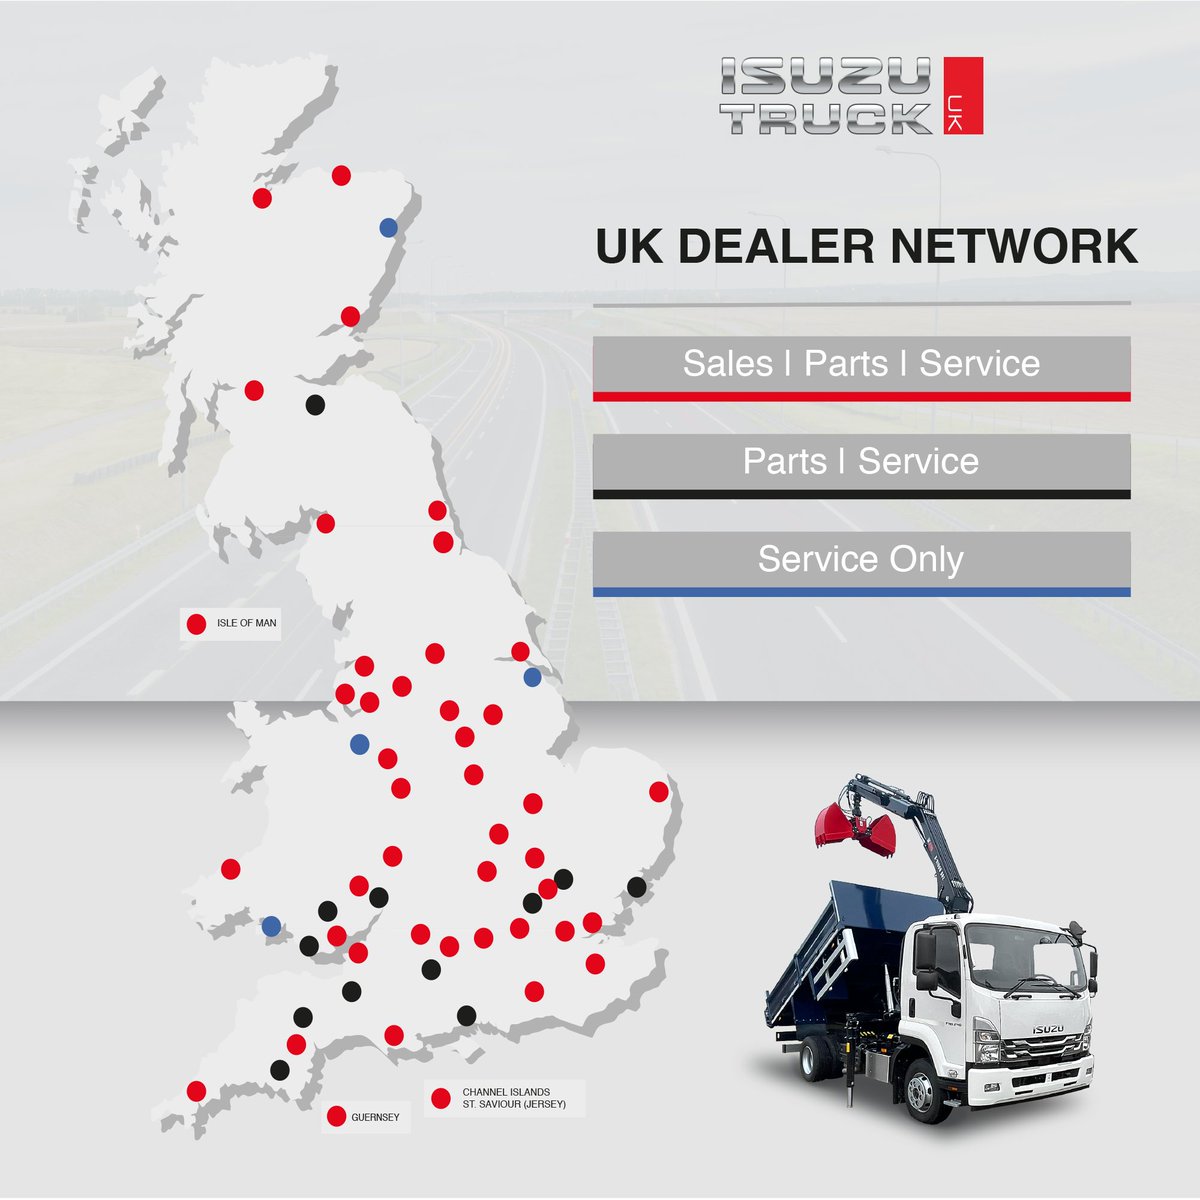 Always ready to meet your requirements. The Isuzu Truck dealer network is here for you. You can find your local Isuzu truck dealer with our interactive map on our website 👉 isuzutruck.co.uk/dealers/ #IsuzuTruckUK #DealerNetwork #CommercialVehicle #CustomerService #Sales